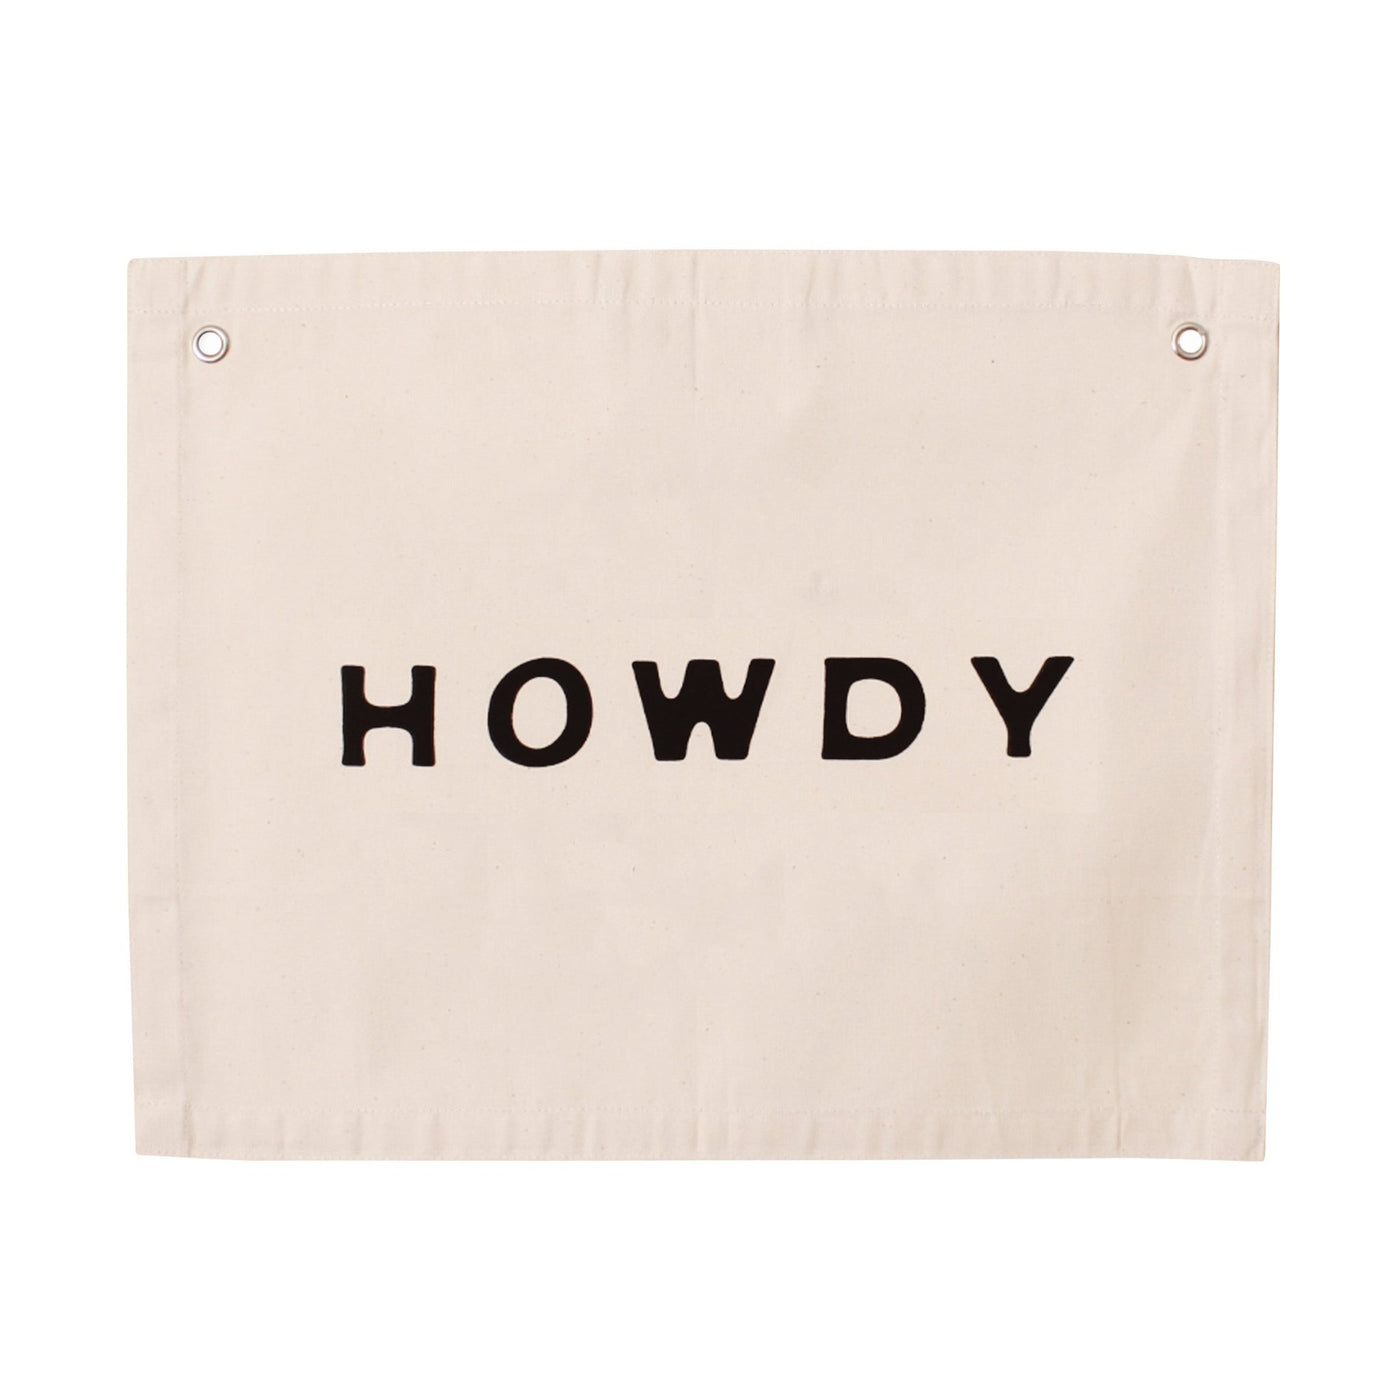 howdy banner - Sweet Water Decor - Wall Hanging